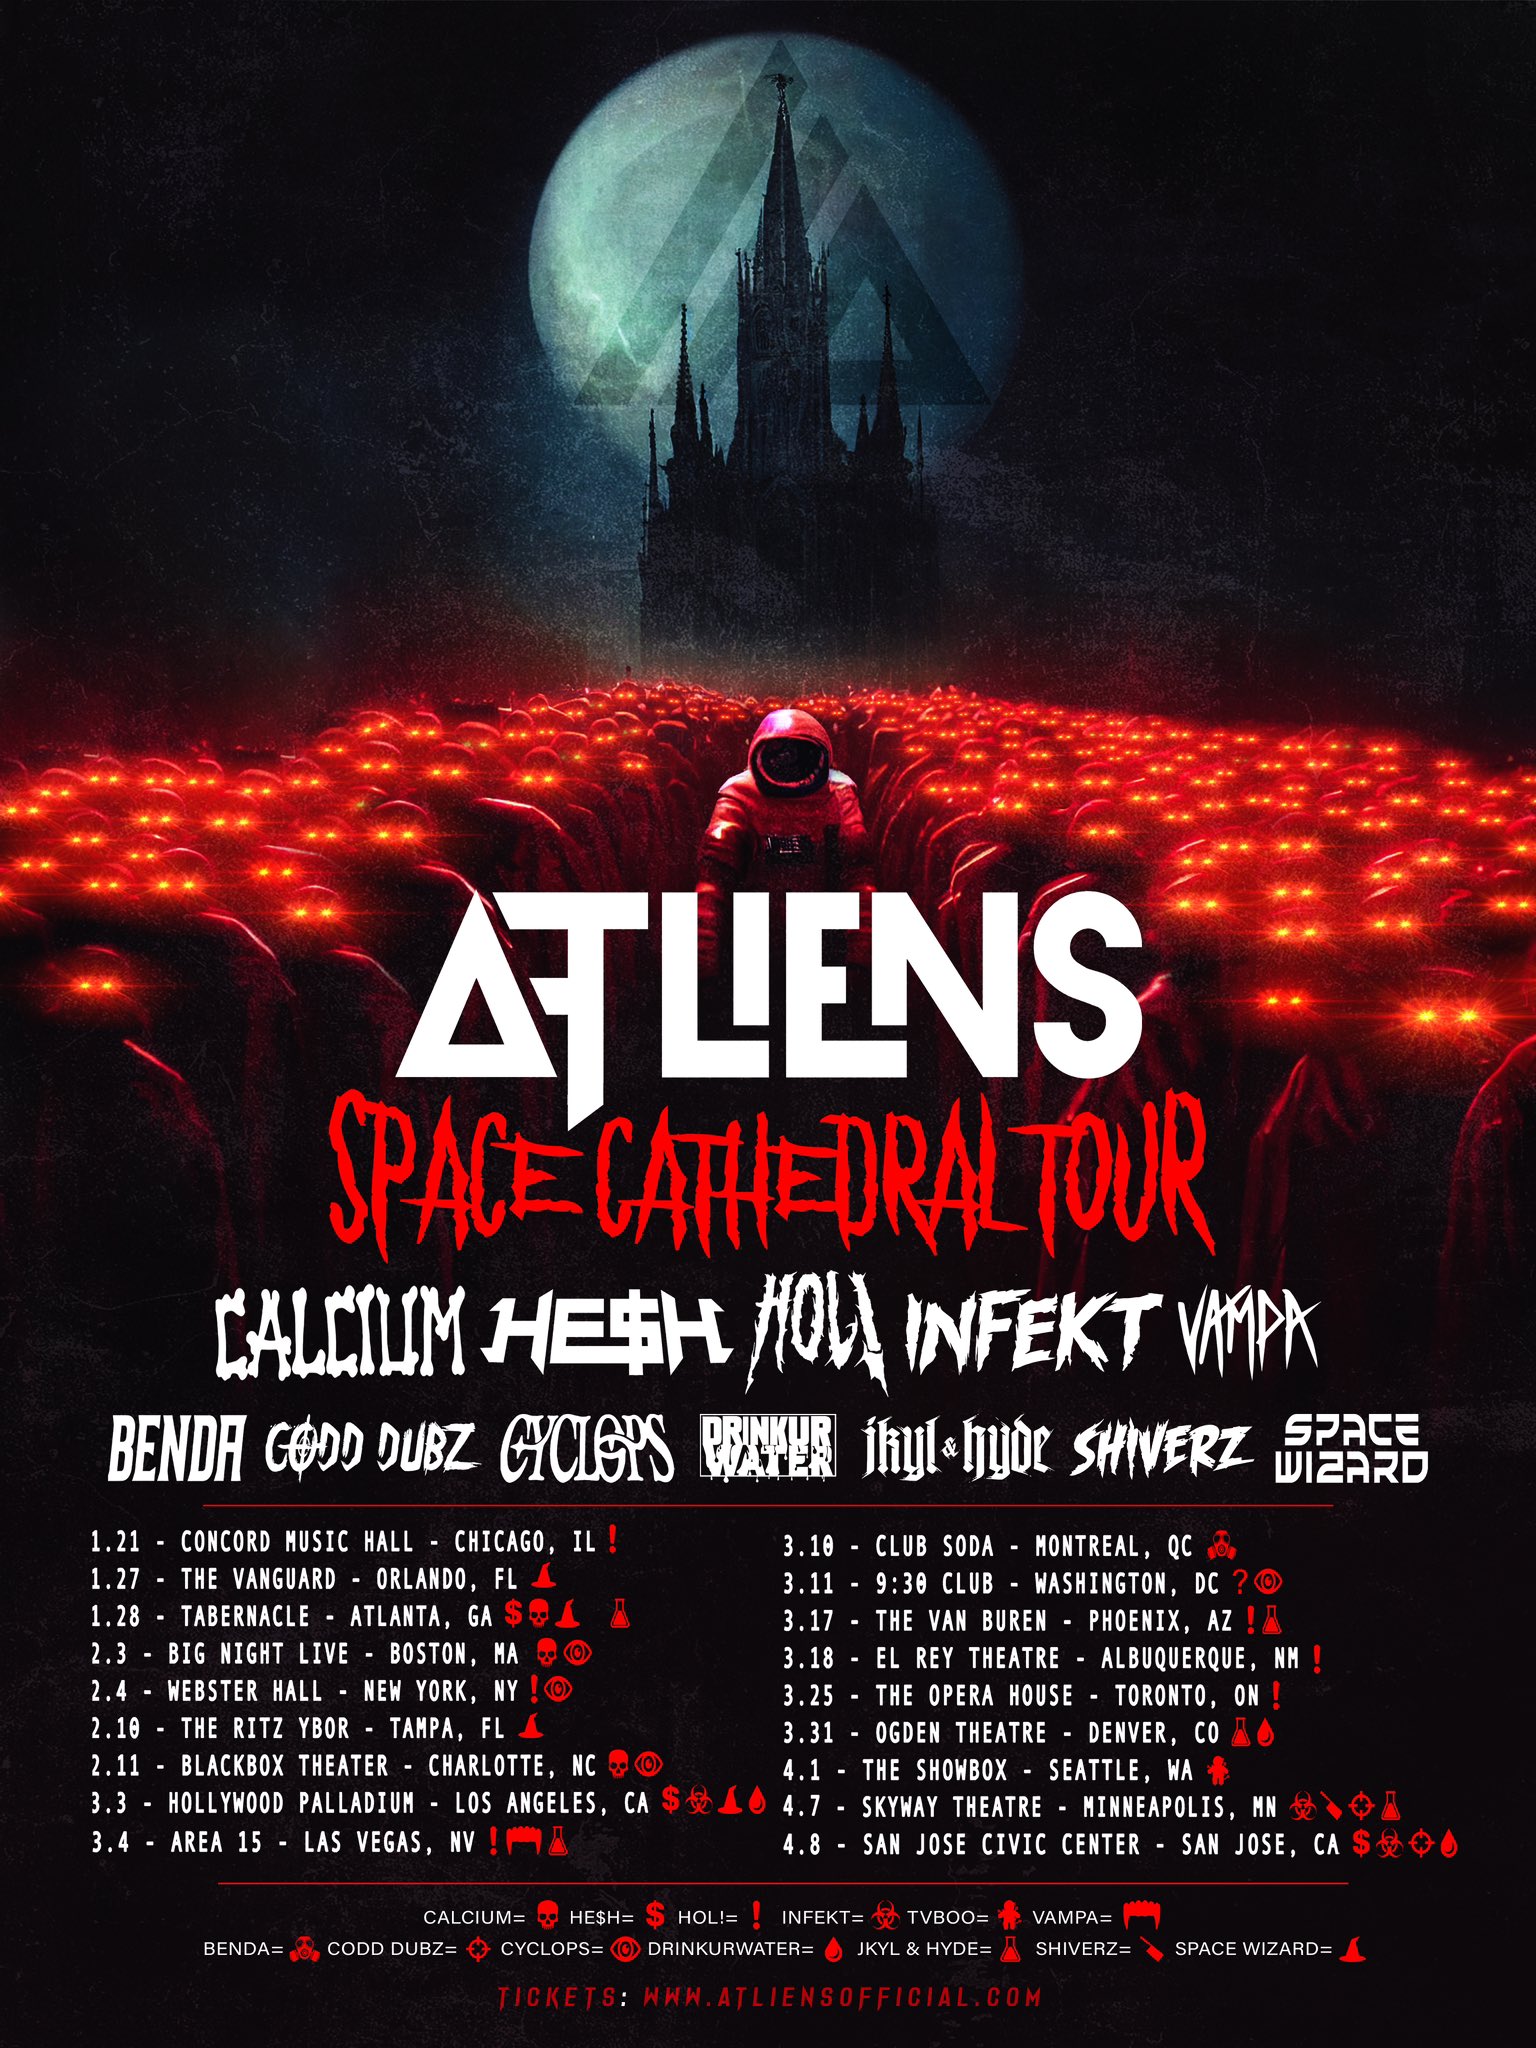 atliens-space-cathedral-tour-phoenix